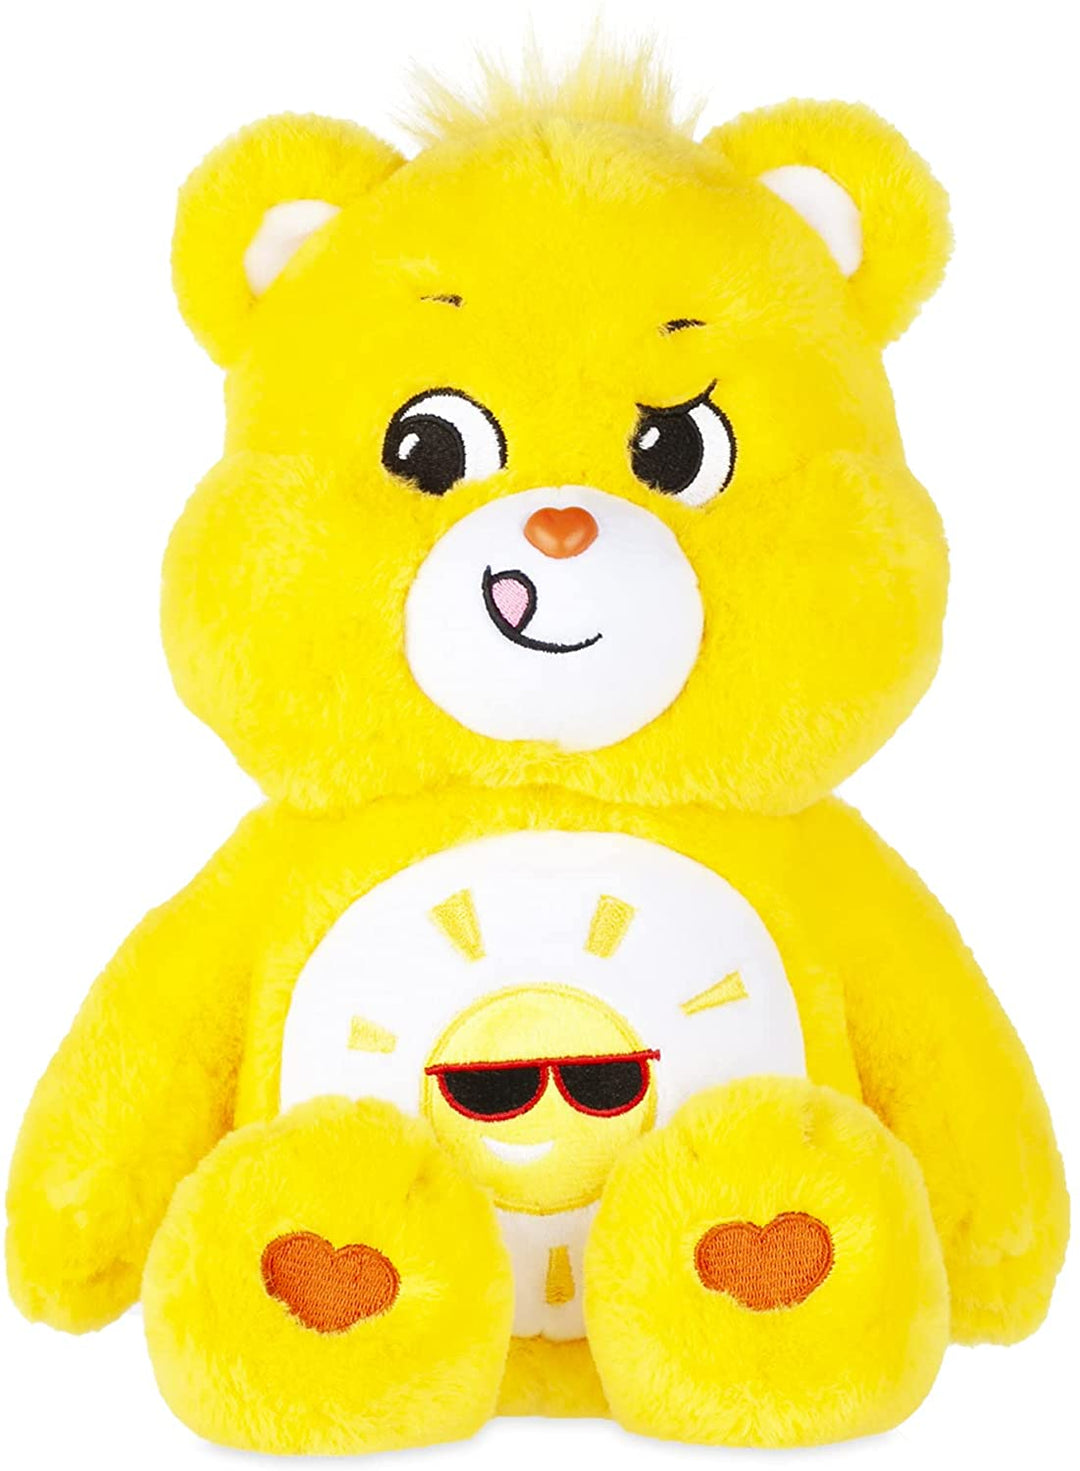 Care Bears 22087 14 Inch Medium Plush Funshine Bear, Collectable Cute Plush Toy, Cuddly Toys for Children, Soft Toys for Girls and Boys, Cute Teddies Suitable for Girls and Boys Aged 4 Years +